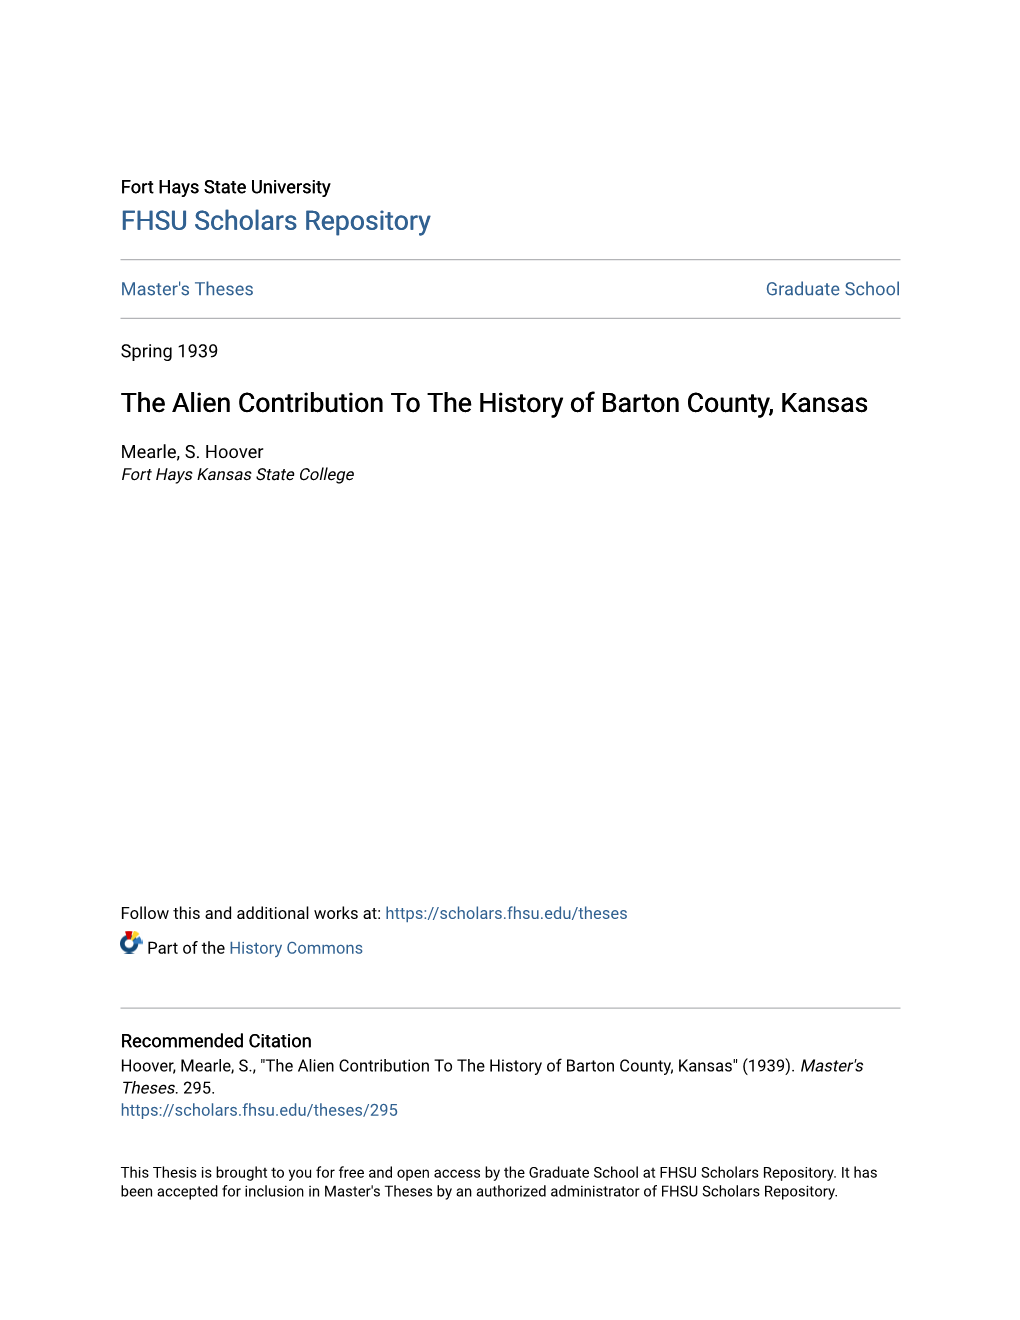 The Alien Contribution to the History of Barton County, Kansas